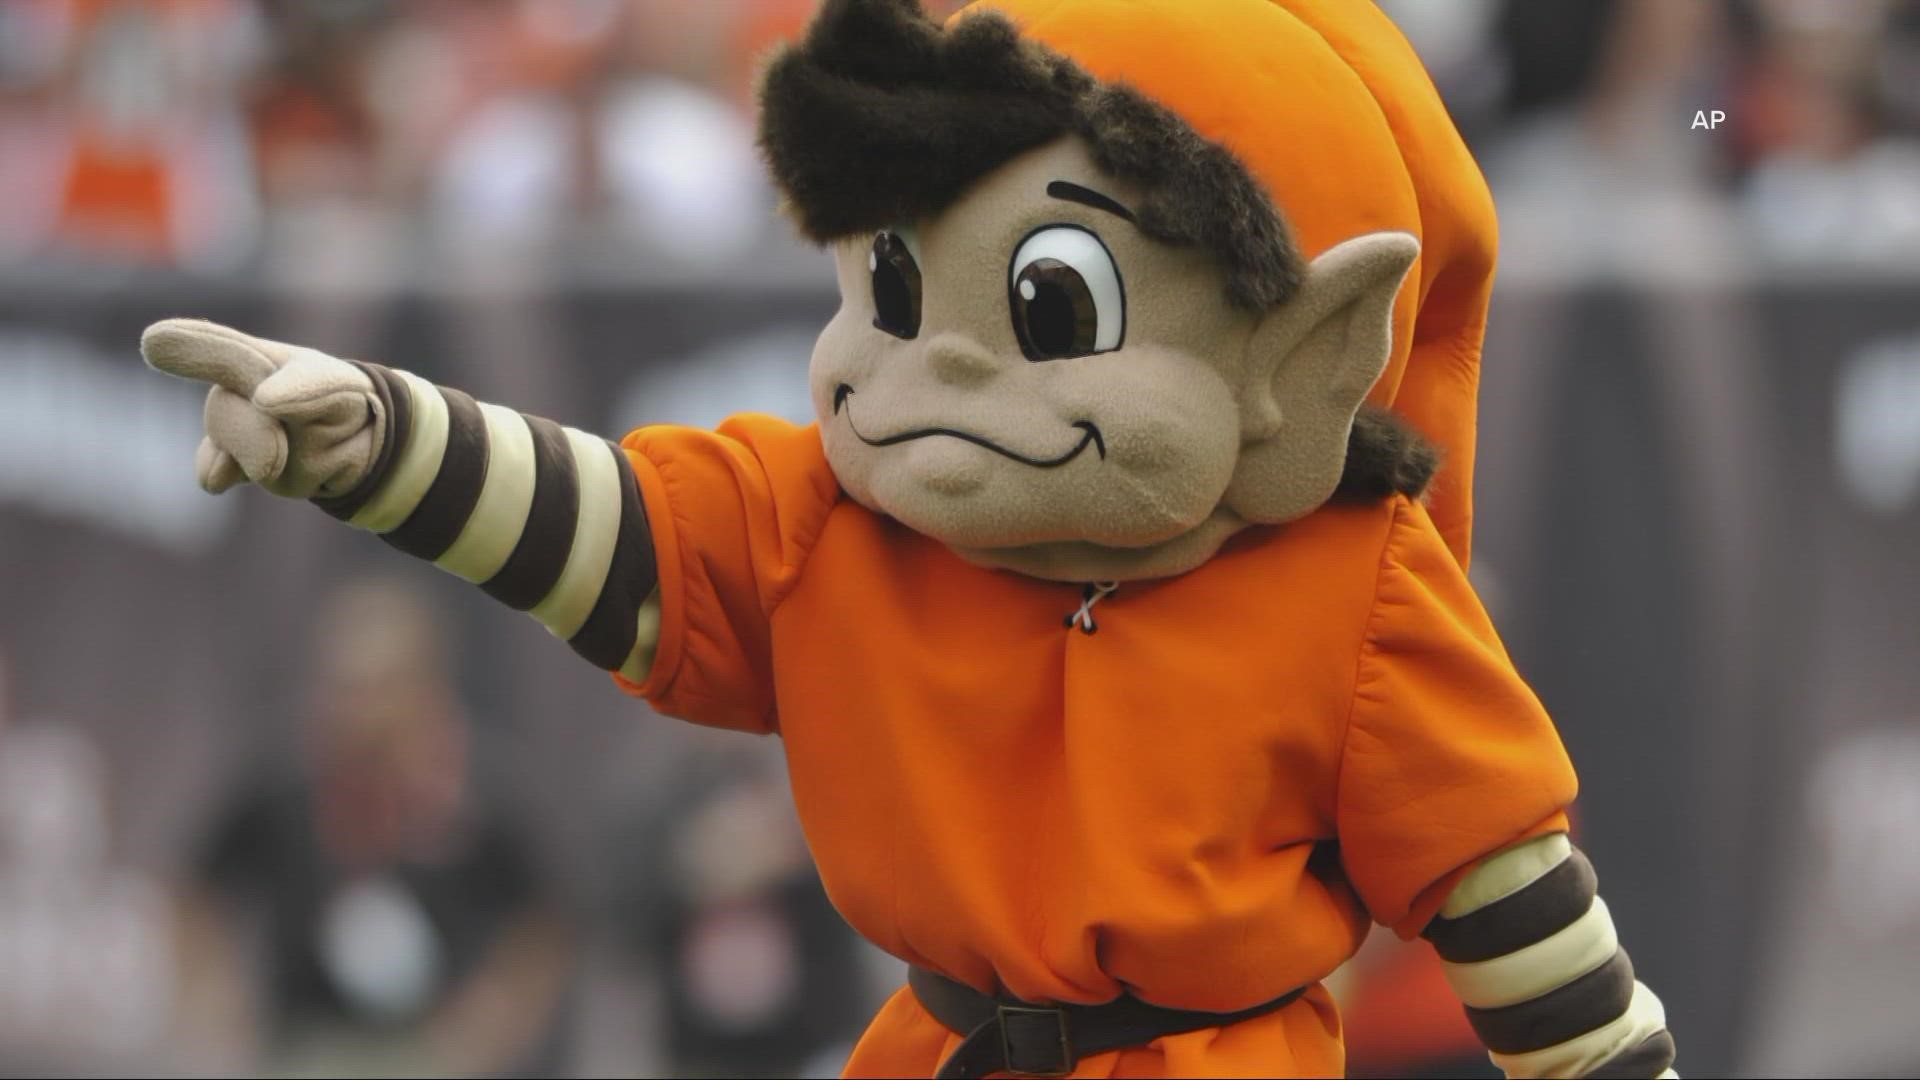 Cleveland Browns mascot: The story behind Brownie the Elf